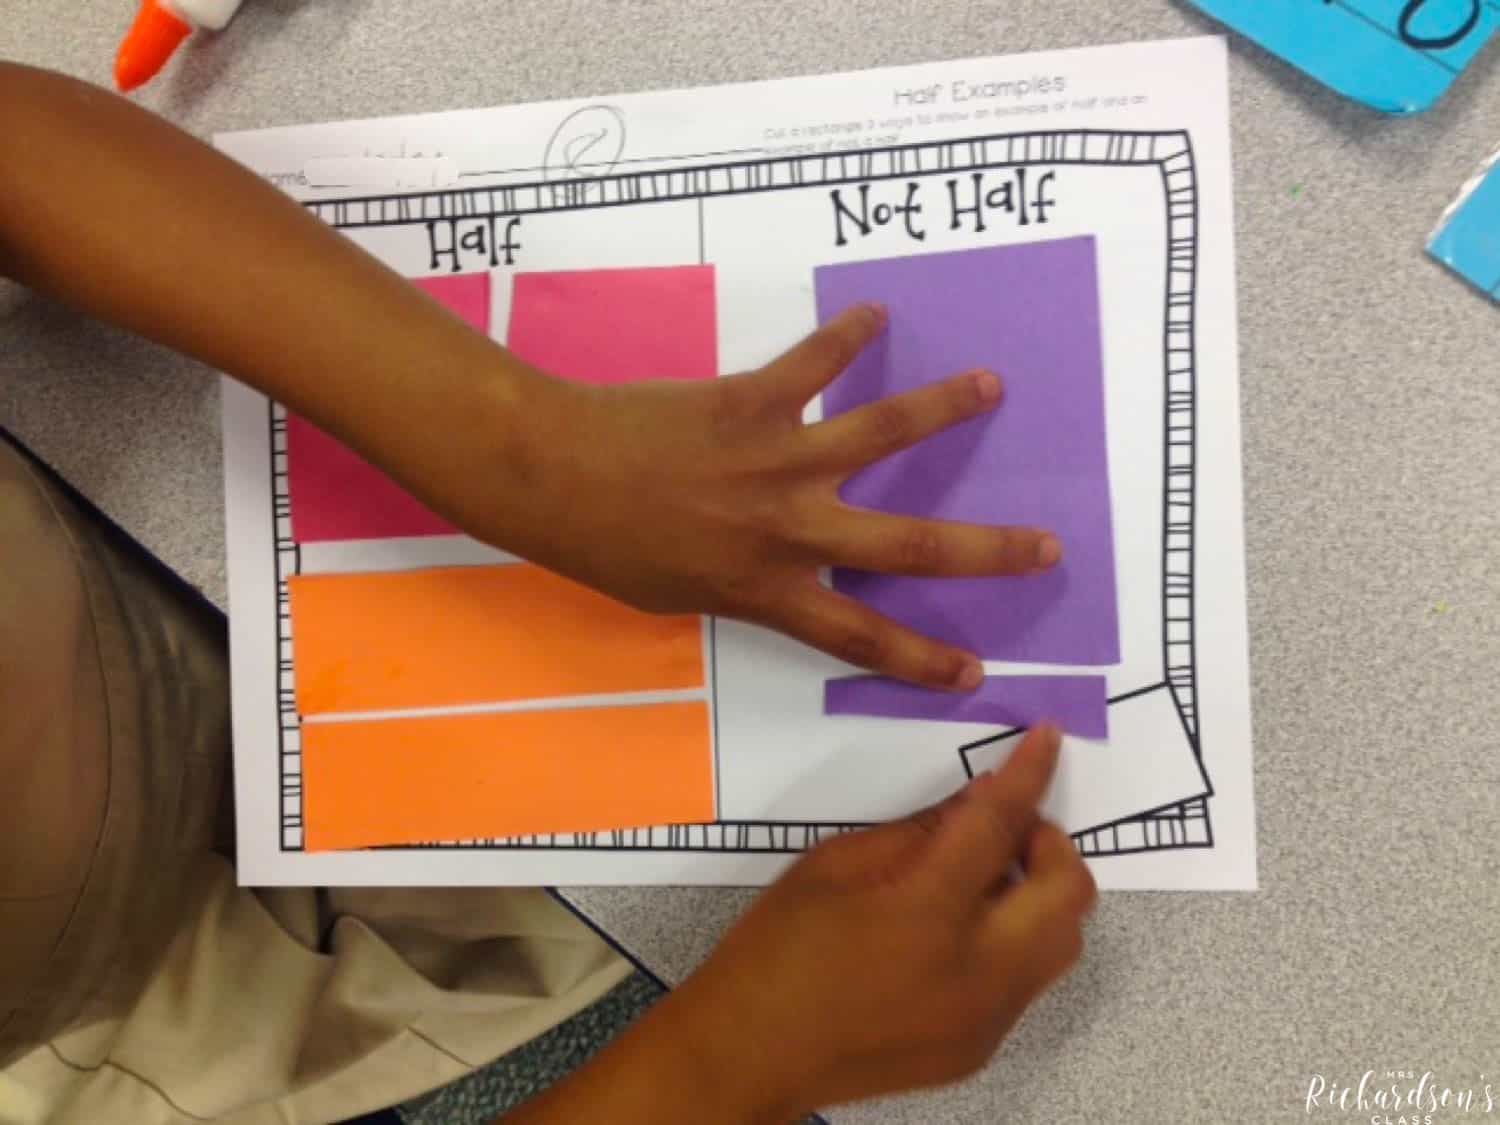 Having students create examples of halves and not halves is a great way for them to have an hands-on experience with fractions!